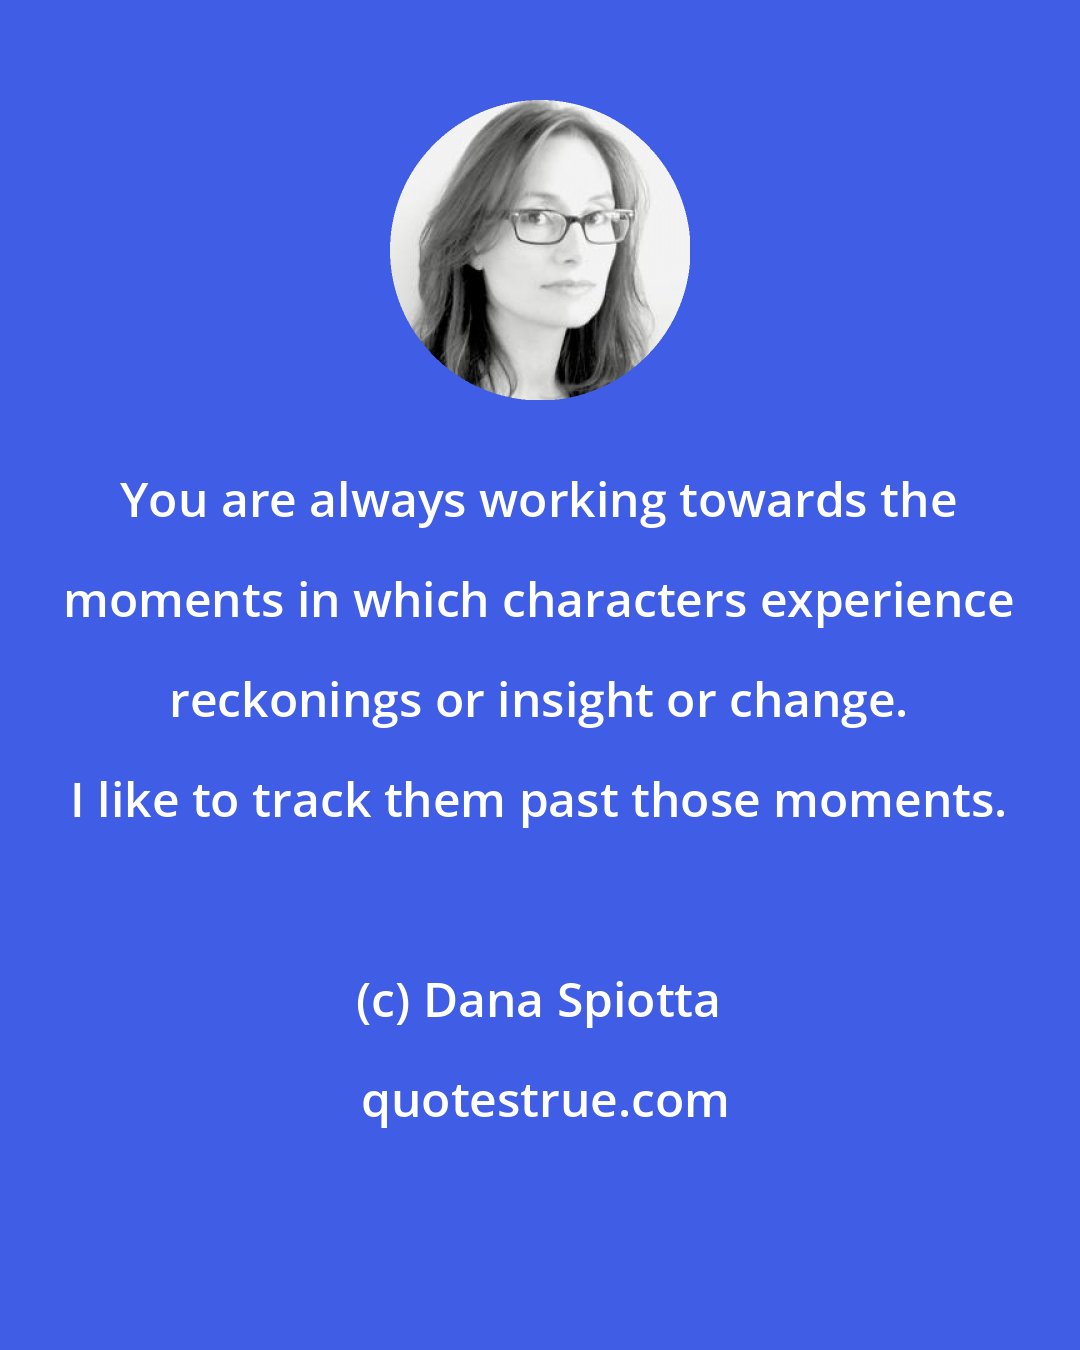 Dana Spiotta: You are always working towards the moments in which characters experience reckonings or insight or change. I like to track them past those moments.